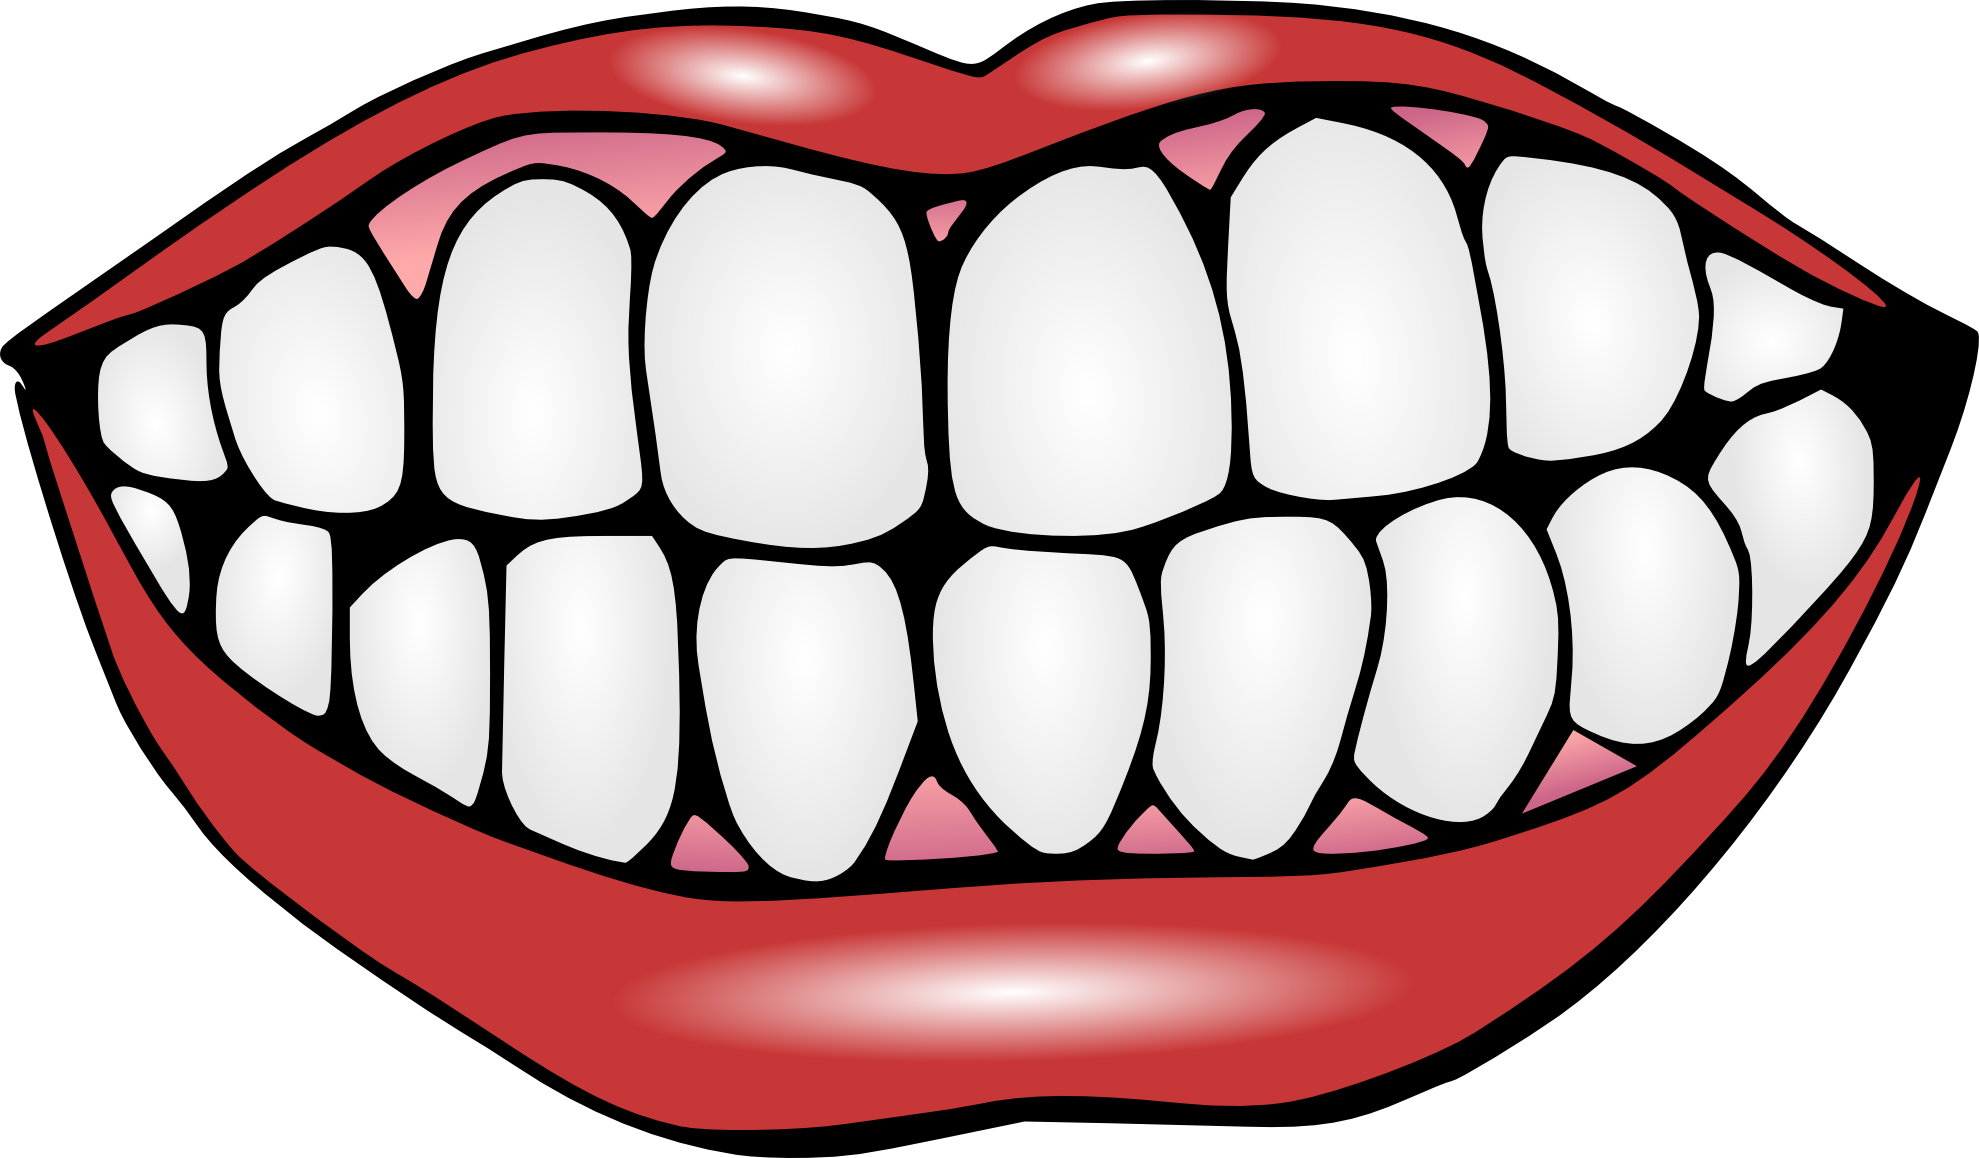 Human tooth Mouth Lip Clip art